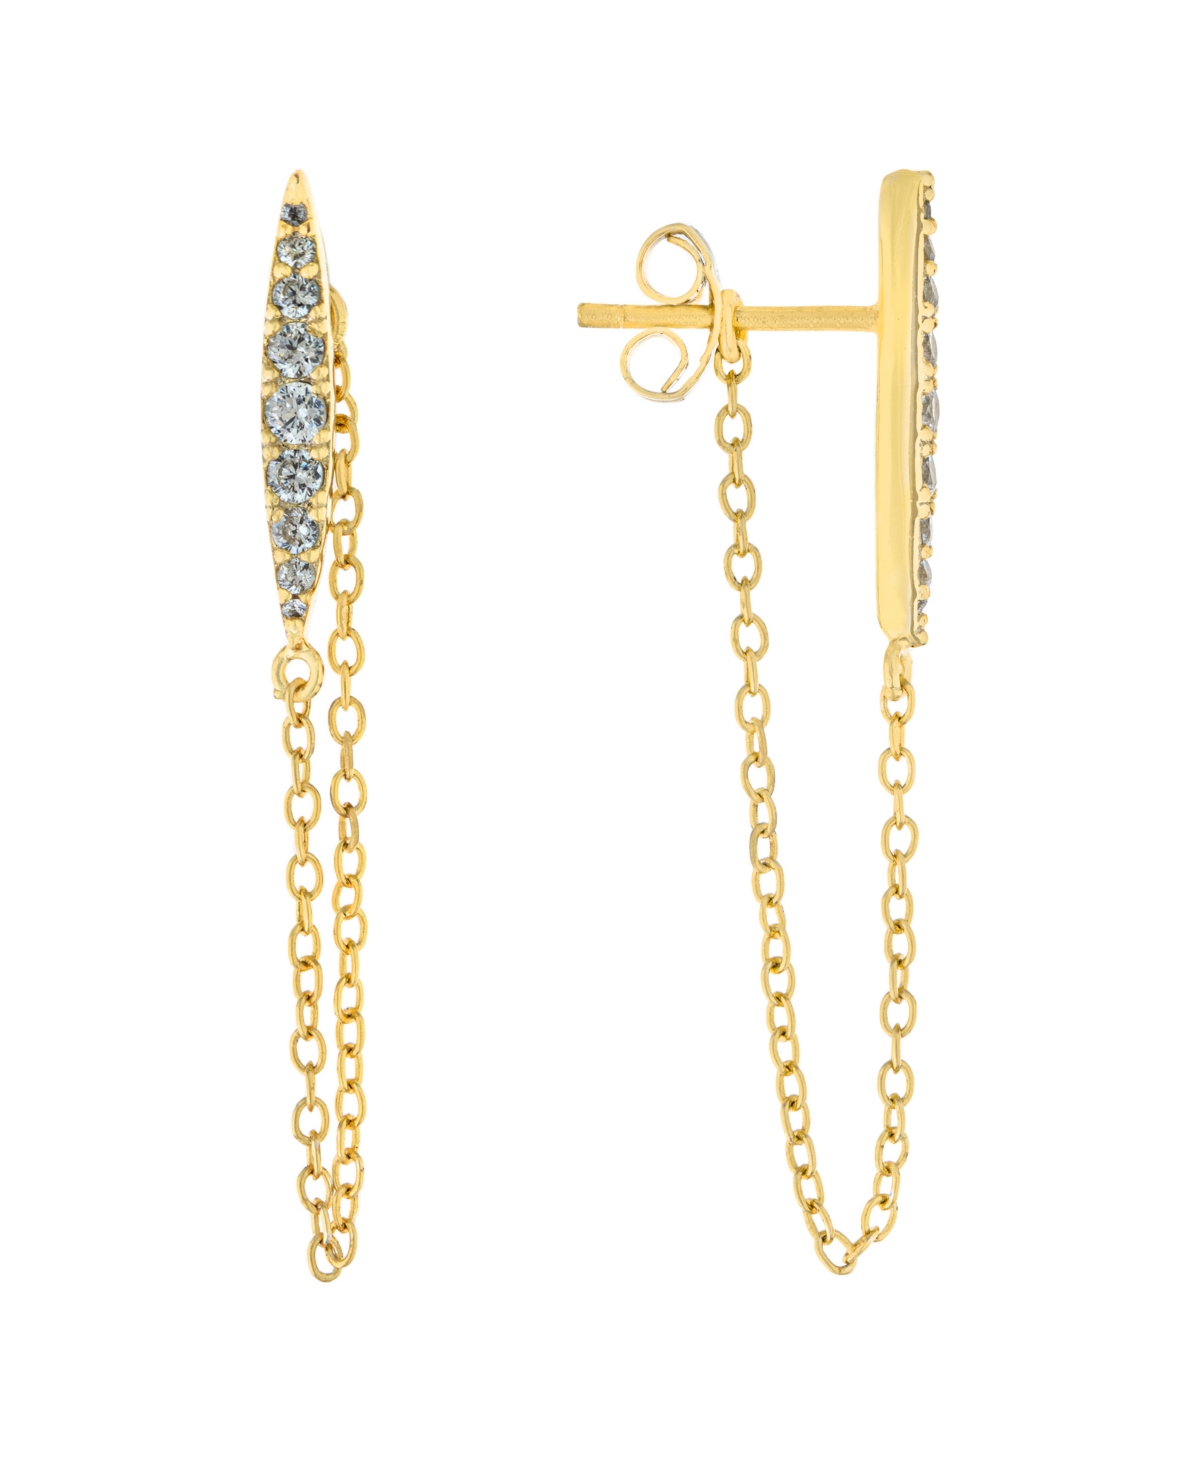 Giani Bernini Cubic Zirconia Front Back Post Chain Earrings In Gold Over Sterling Silver